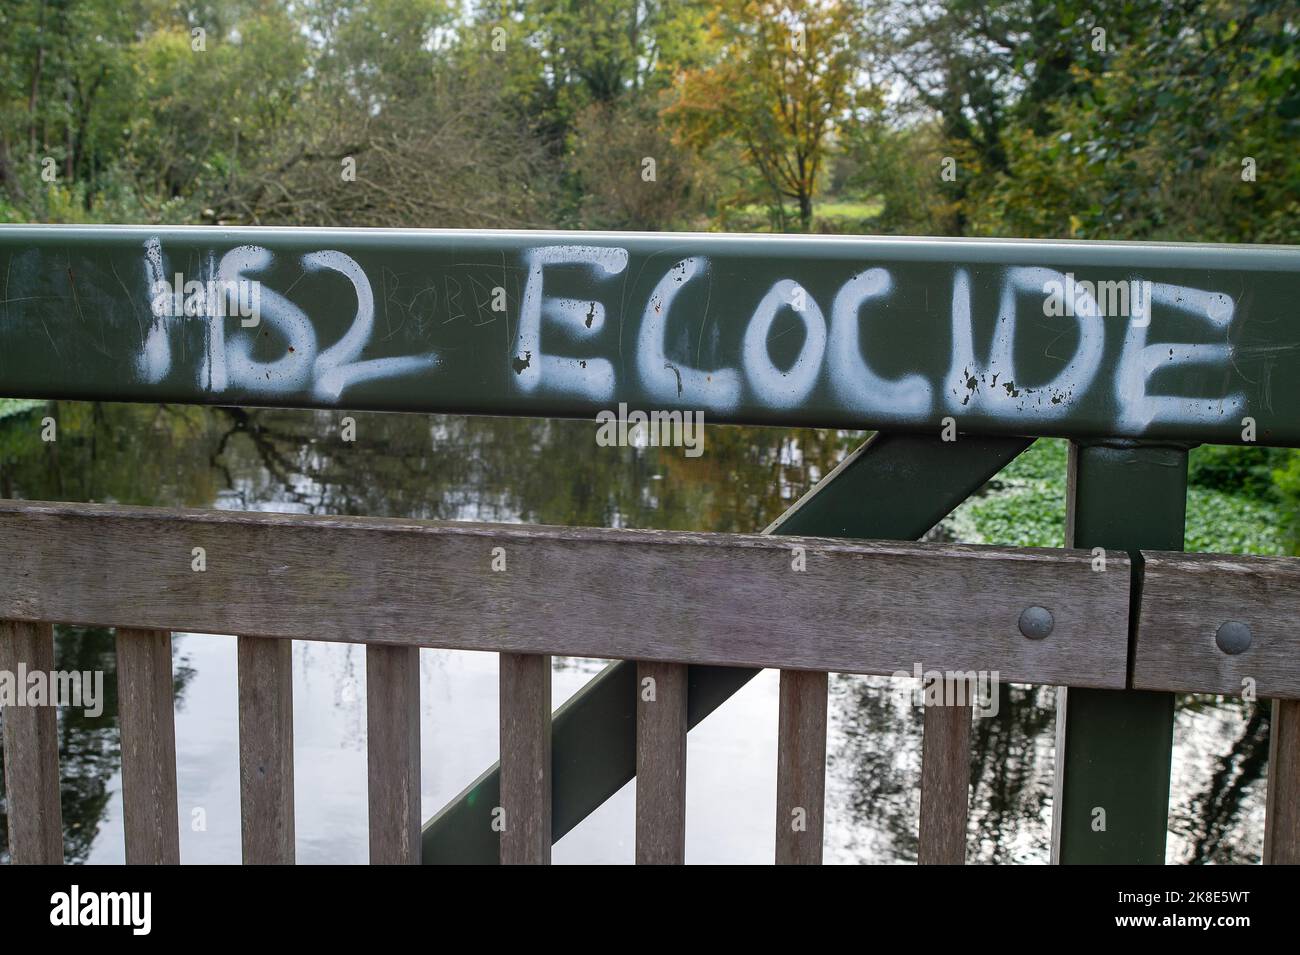 Denham, Uxbridge, UK. 22nd October, 2022. HS2 Ecocide graffiti on a bridge in the Colne Valley Park where HS2 have destroyed a large of trees as part of the High Speed 2 Rail project. Phase 1 of the HS2 project is reported to be vastly over budget and the Treasury  have asked for a financial review to take place. Environmentalists are continuing their fight to get HS2 to be cancelled. Credit: Maureen McLean/Alamy Live News Stock Photo